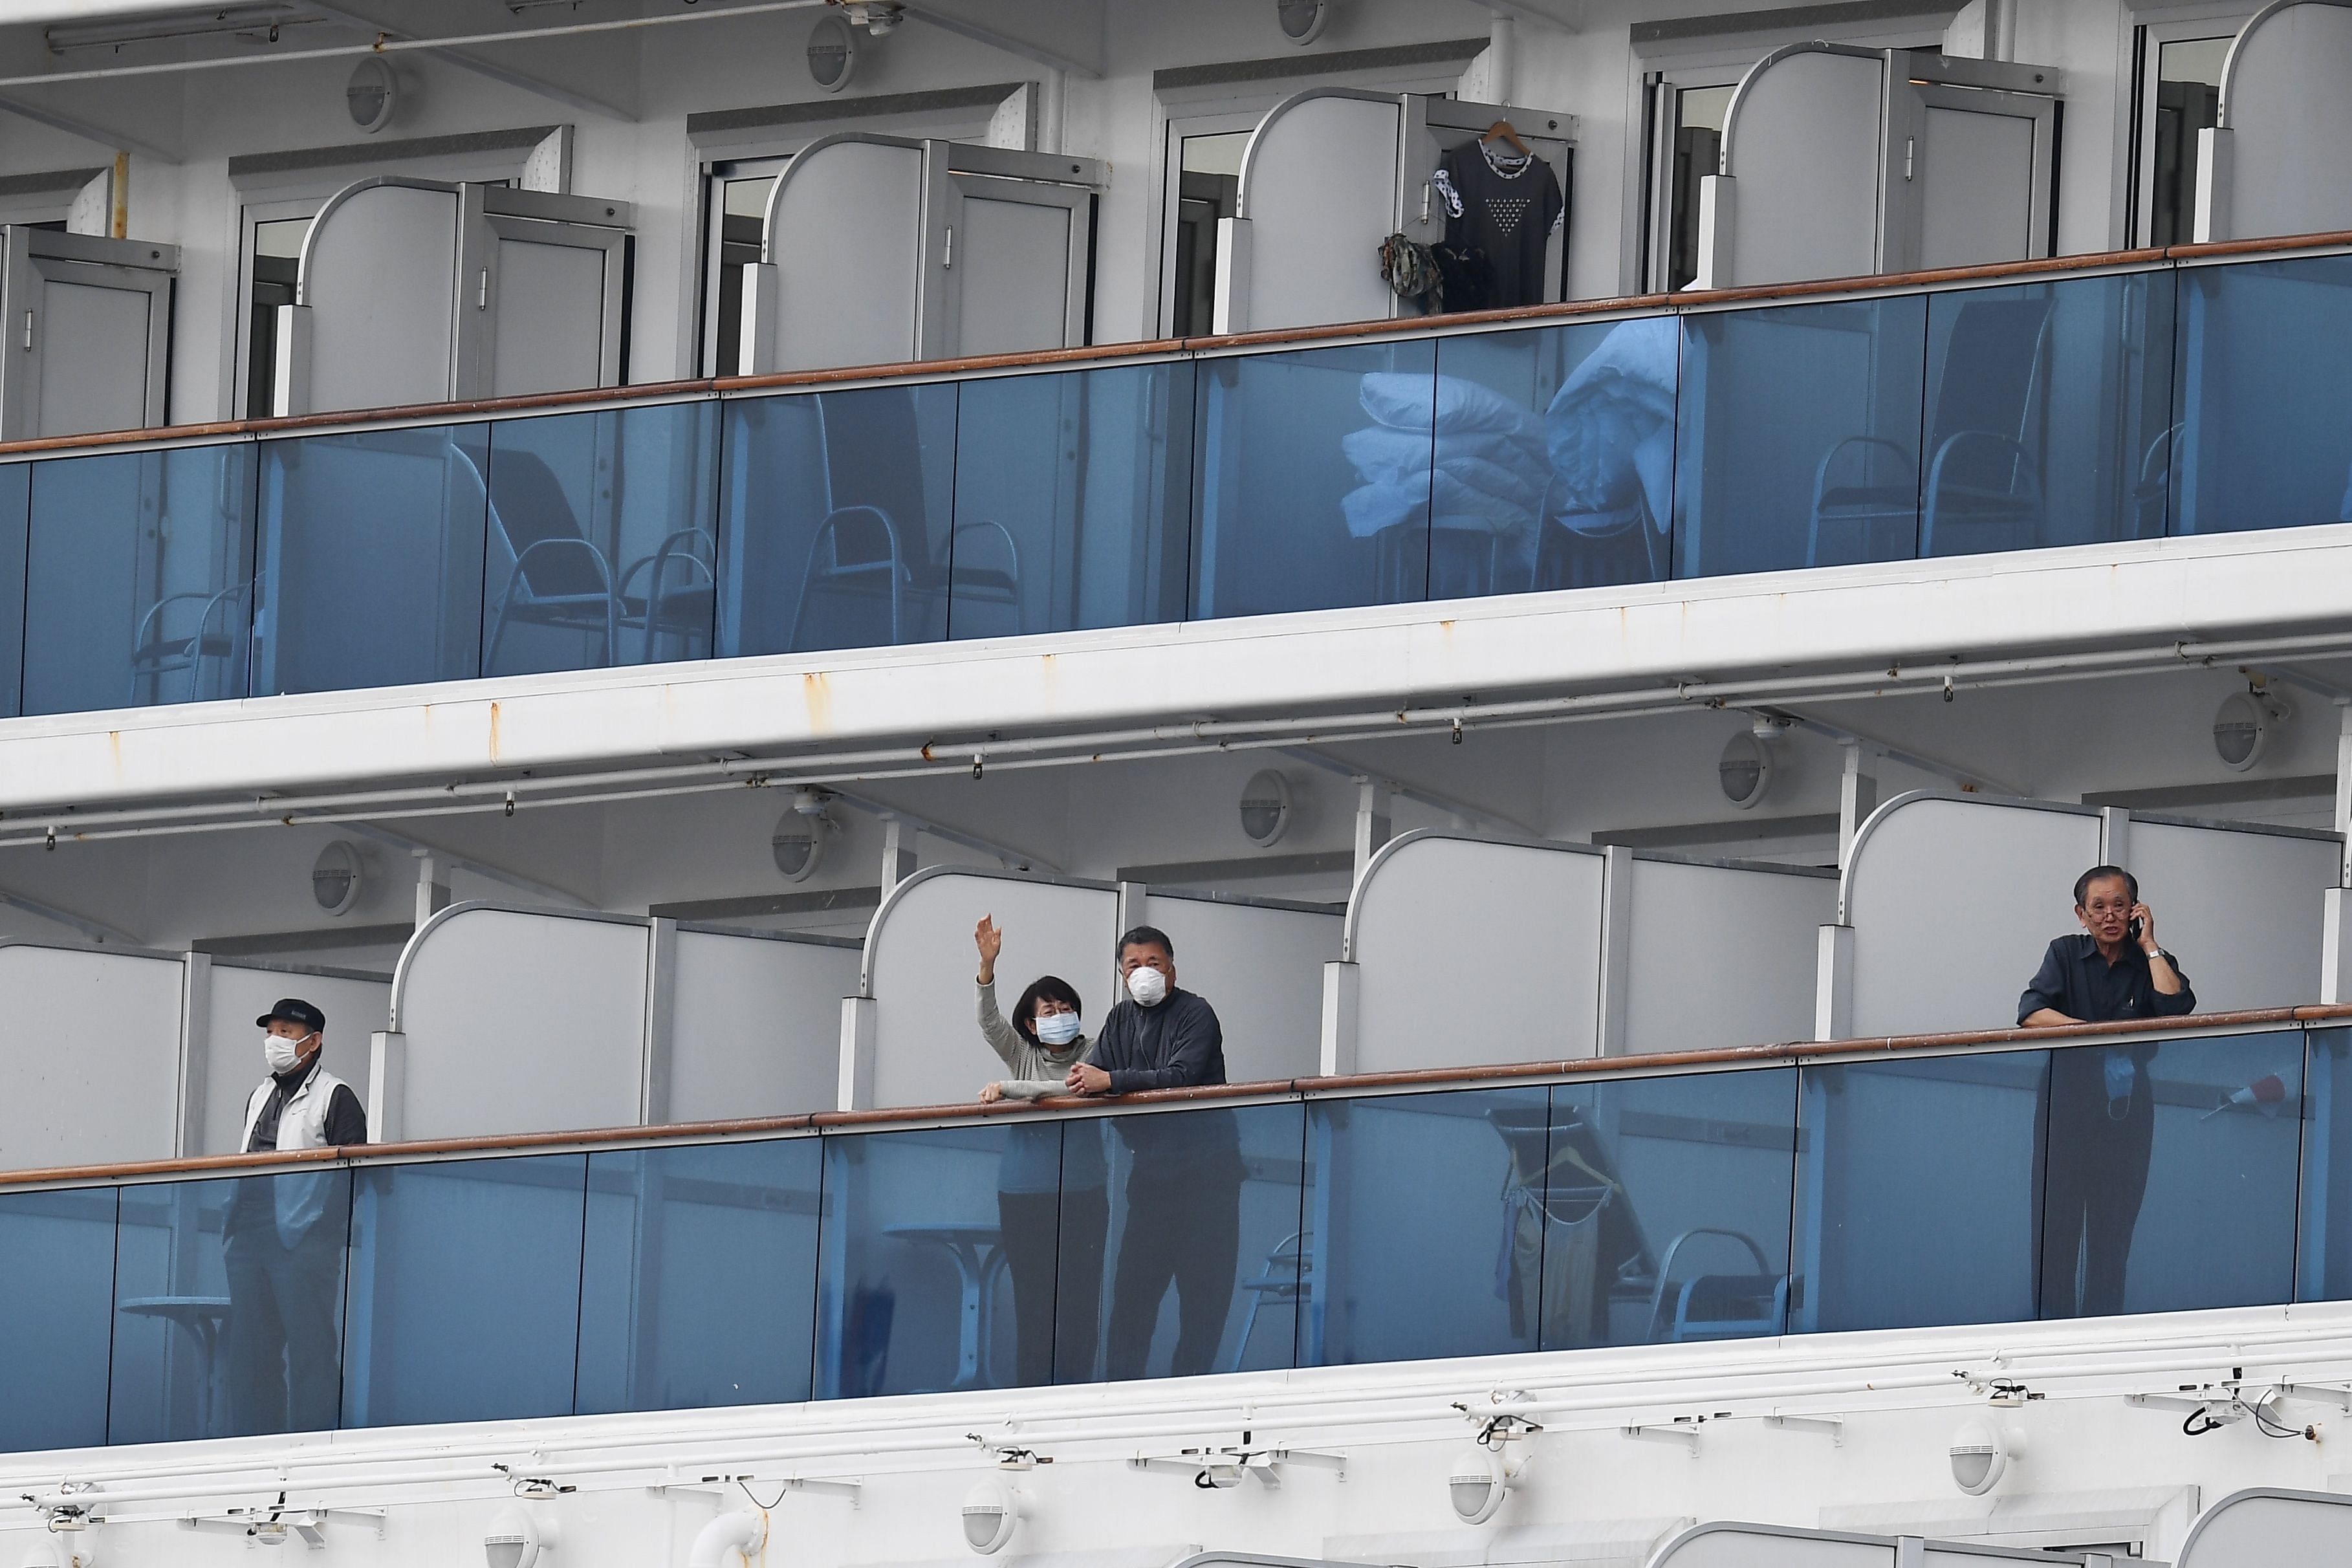 The ship, managed by Princess Cruise Lines and owned by Miami-based Carnival Corp, typically has a crew of 1,100 and a passenger capacity of 2,670. (Credit: AFP Photo)